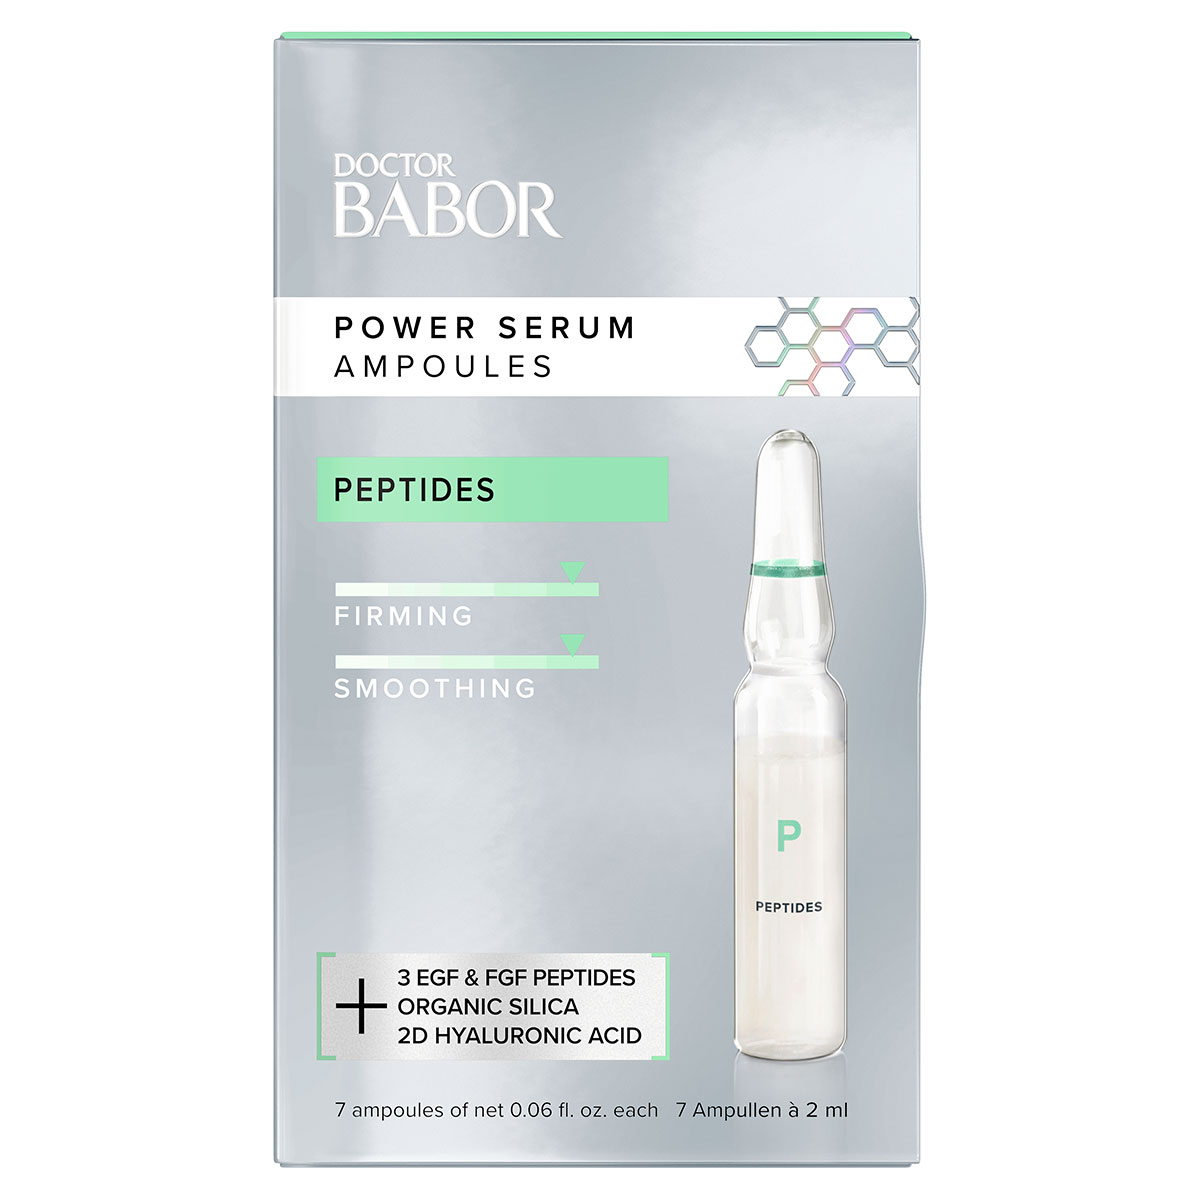 Ампулы с Пептидами DOCTOR BABOR/Power Serum Ampoules Peptides DOCTOR BABOR BABOR Ампулы с Пептидами DOCTOR BABOR/Power Serum Ampoules Peptides DOCTOR BABOR - фото 1